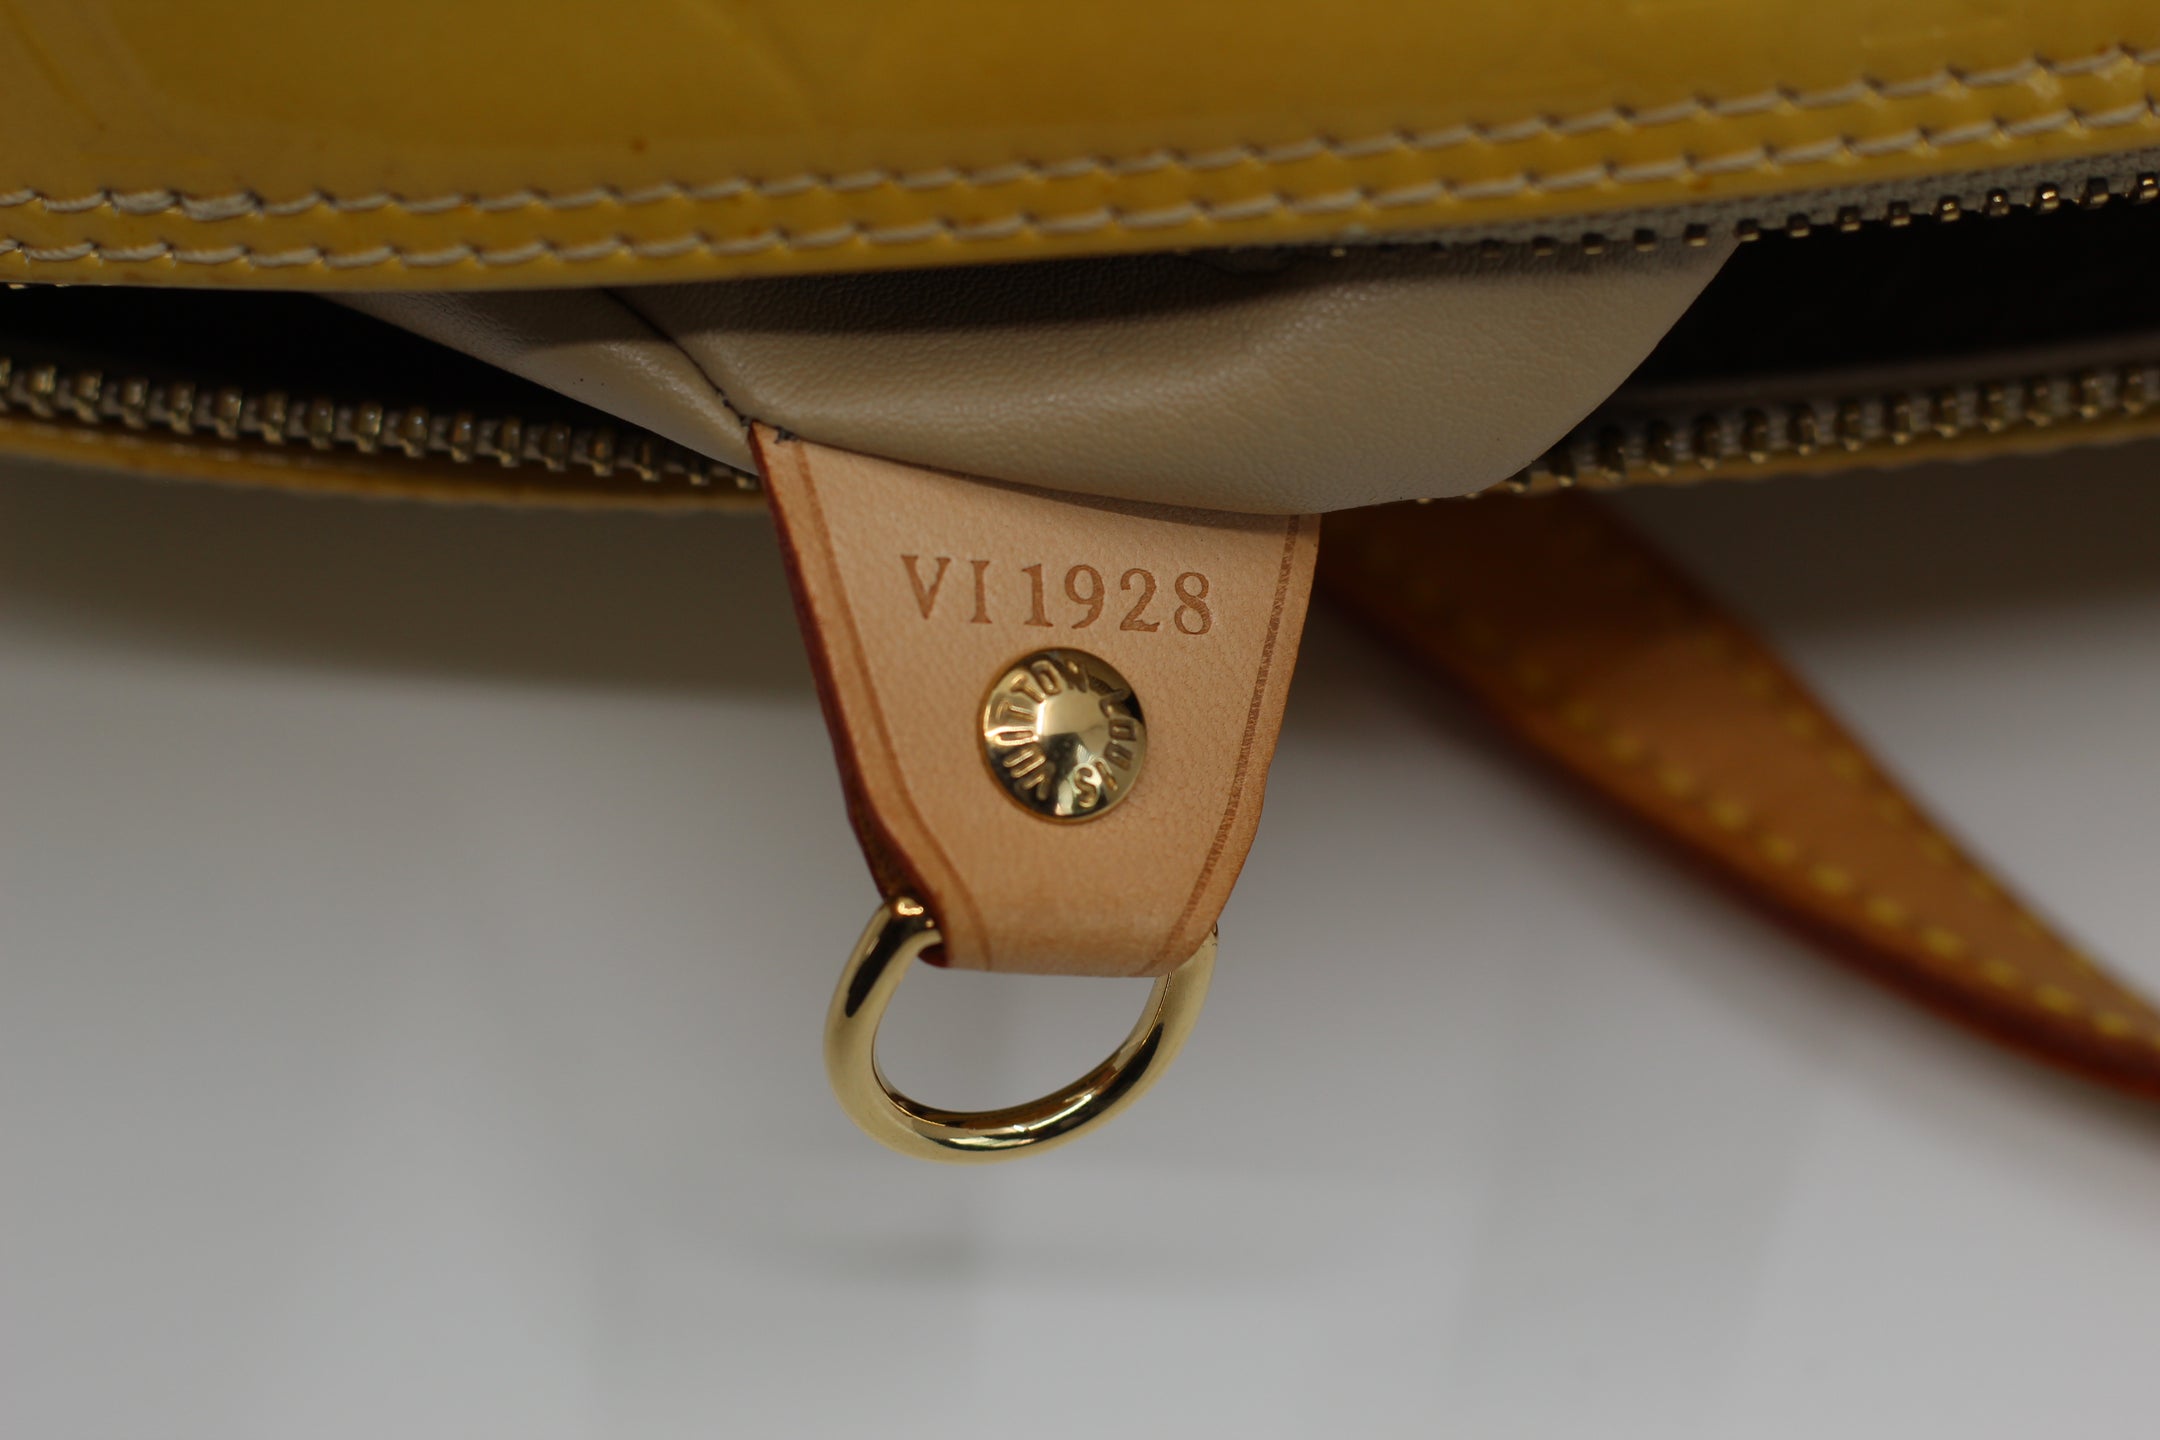 Bedford patent leather handbag Louis Vuitton Yellow in Patent leather -  37379603